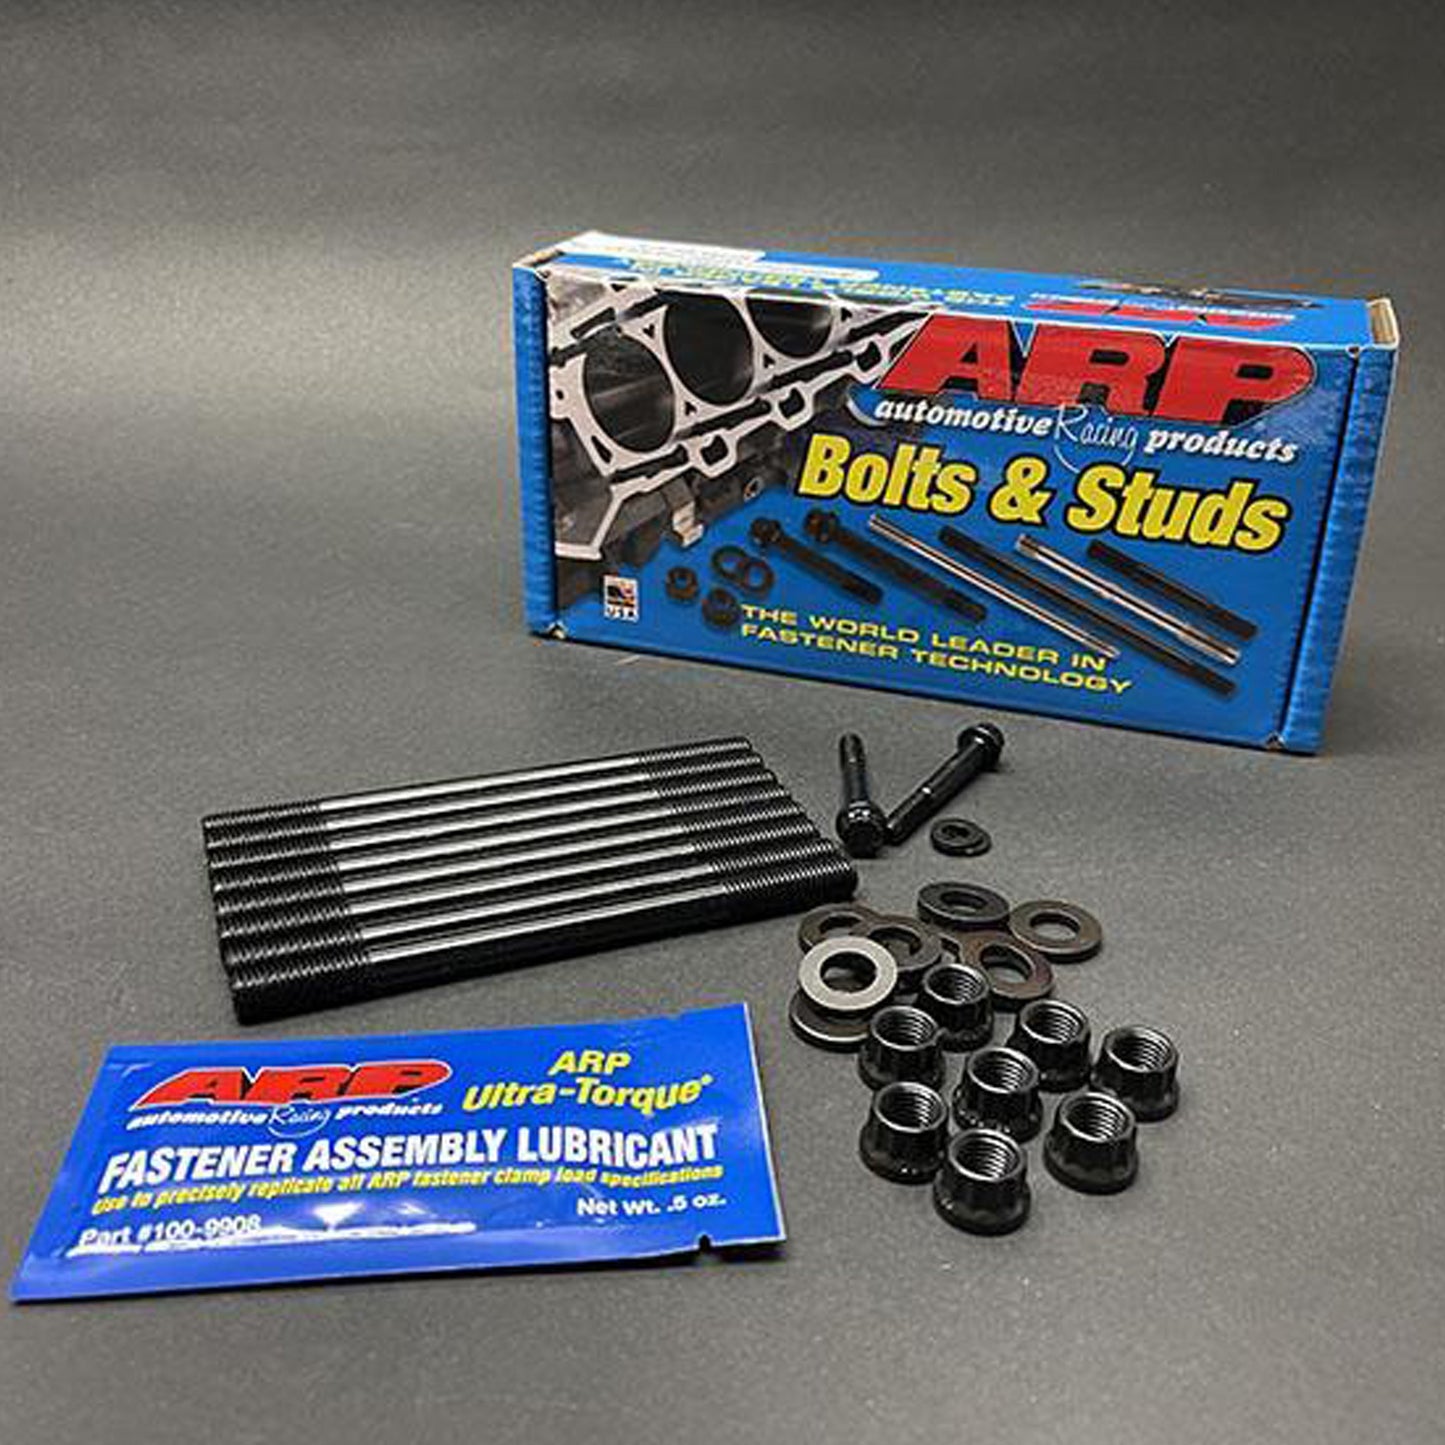 WSRD Terminator Head Stud Kit | Can-Am X3 (Rated to 400HP)